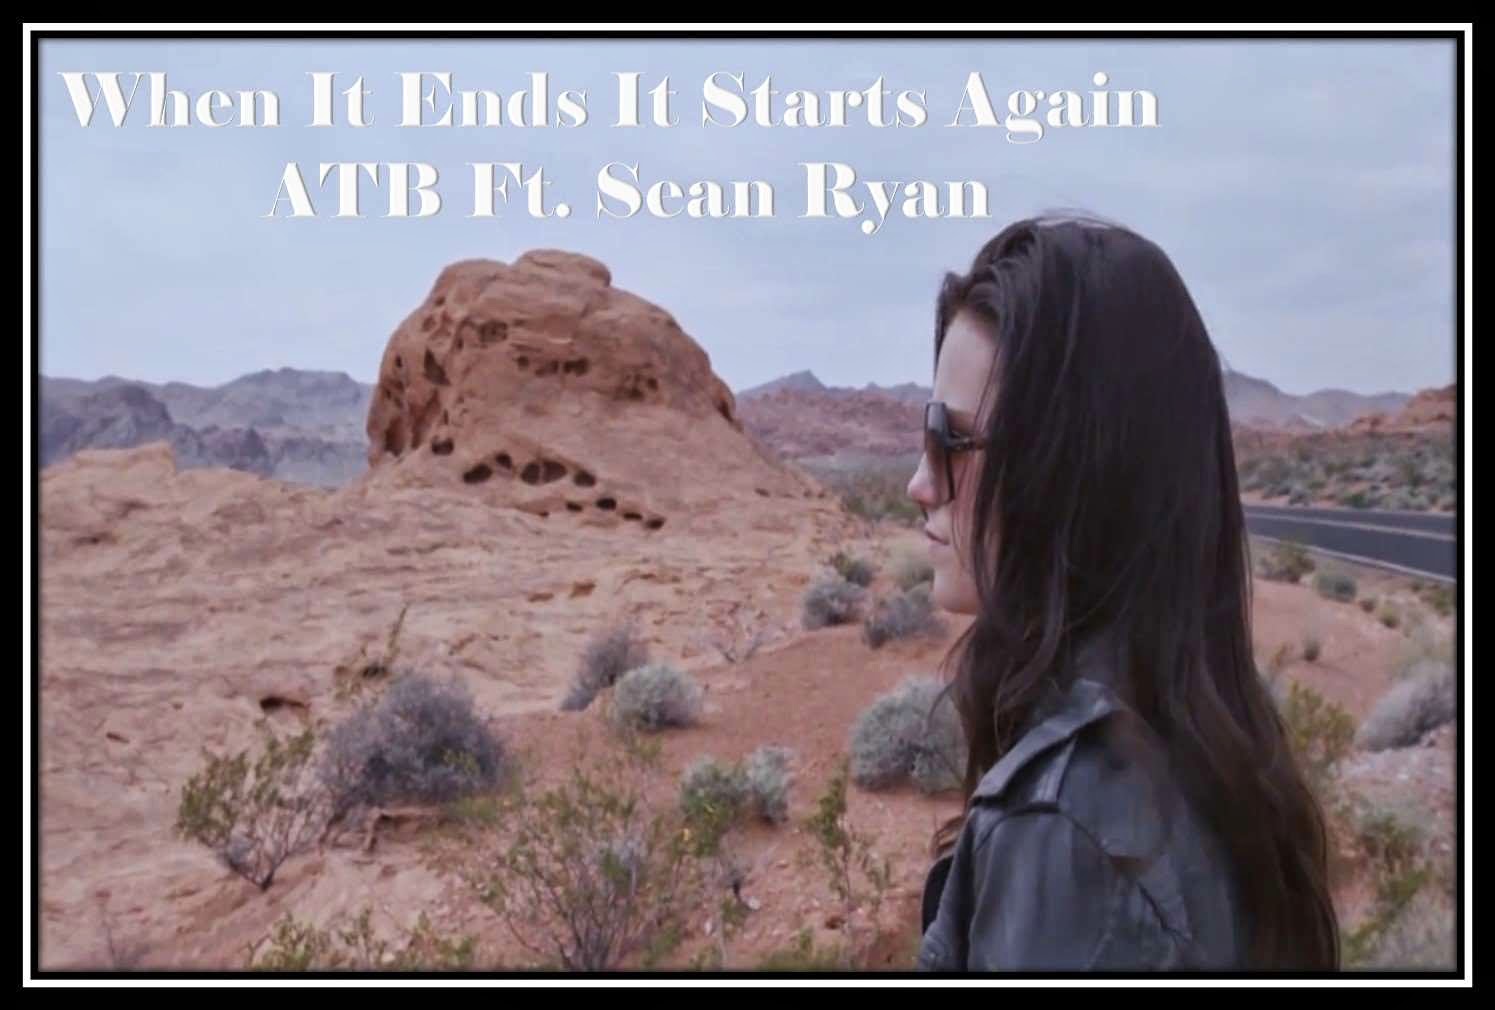 Personal: When It Ends It Starts Again - Atb Ft. Sean Ryan (2014) 1080P Hd Full Video Song Download